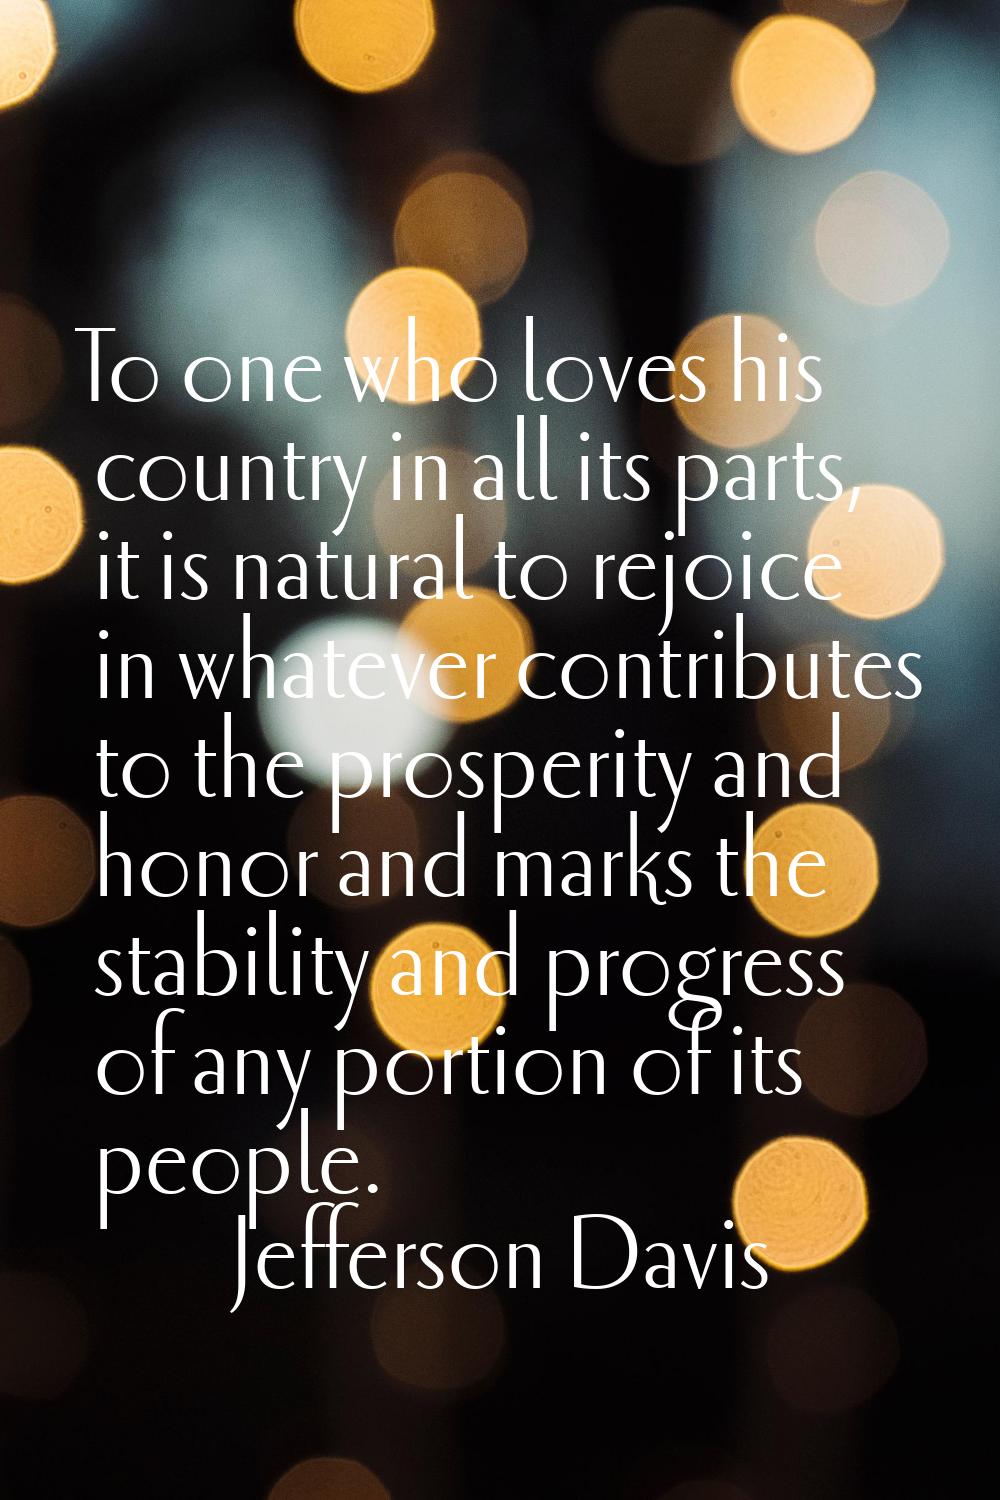 To one who loves his country in all its parts, it is natural to rejoice in whatever contributes to 